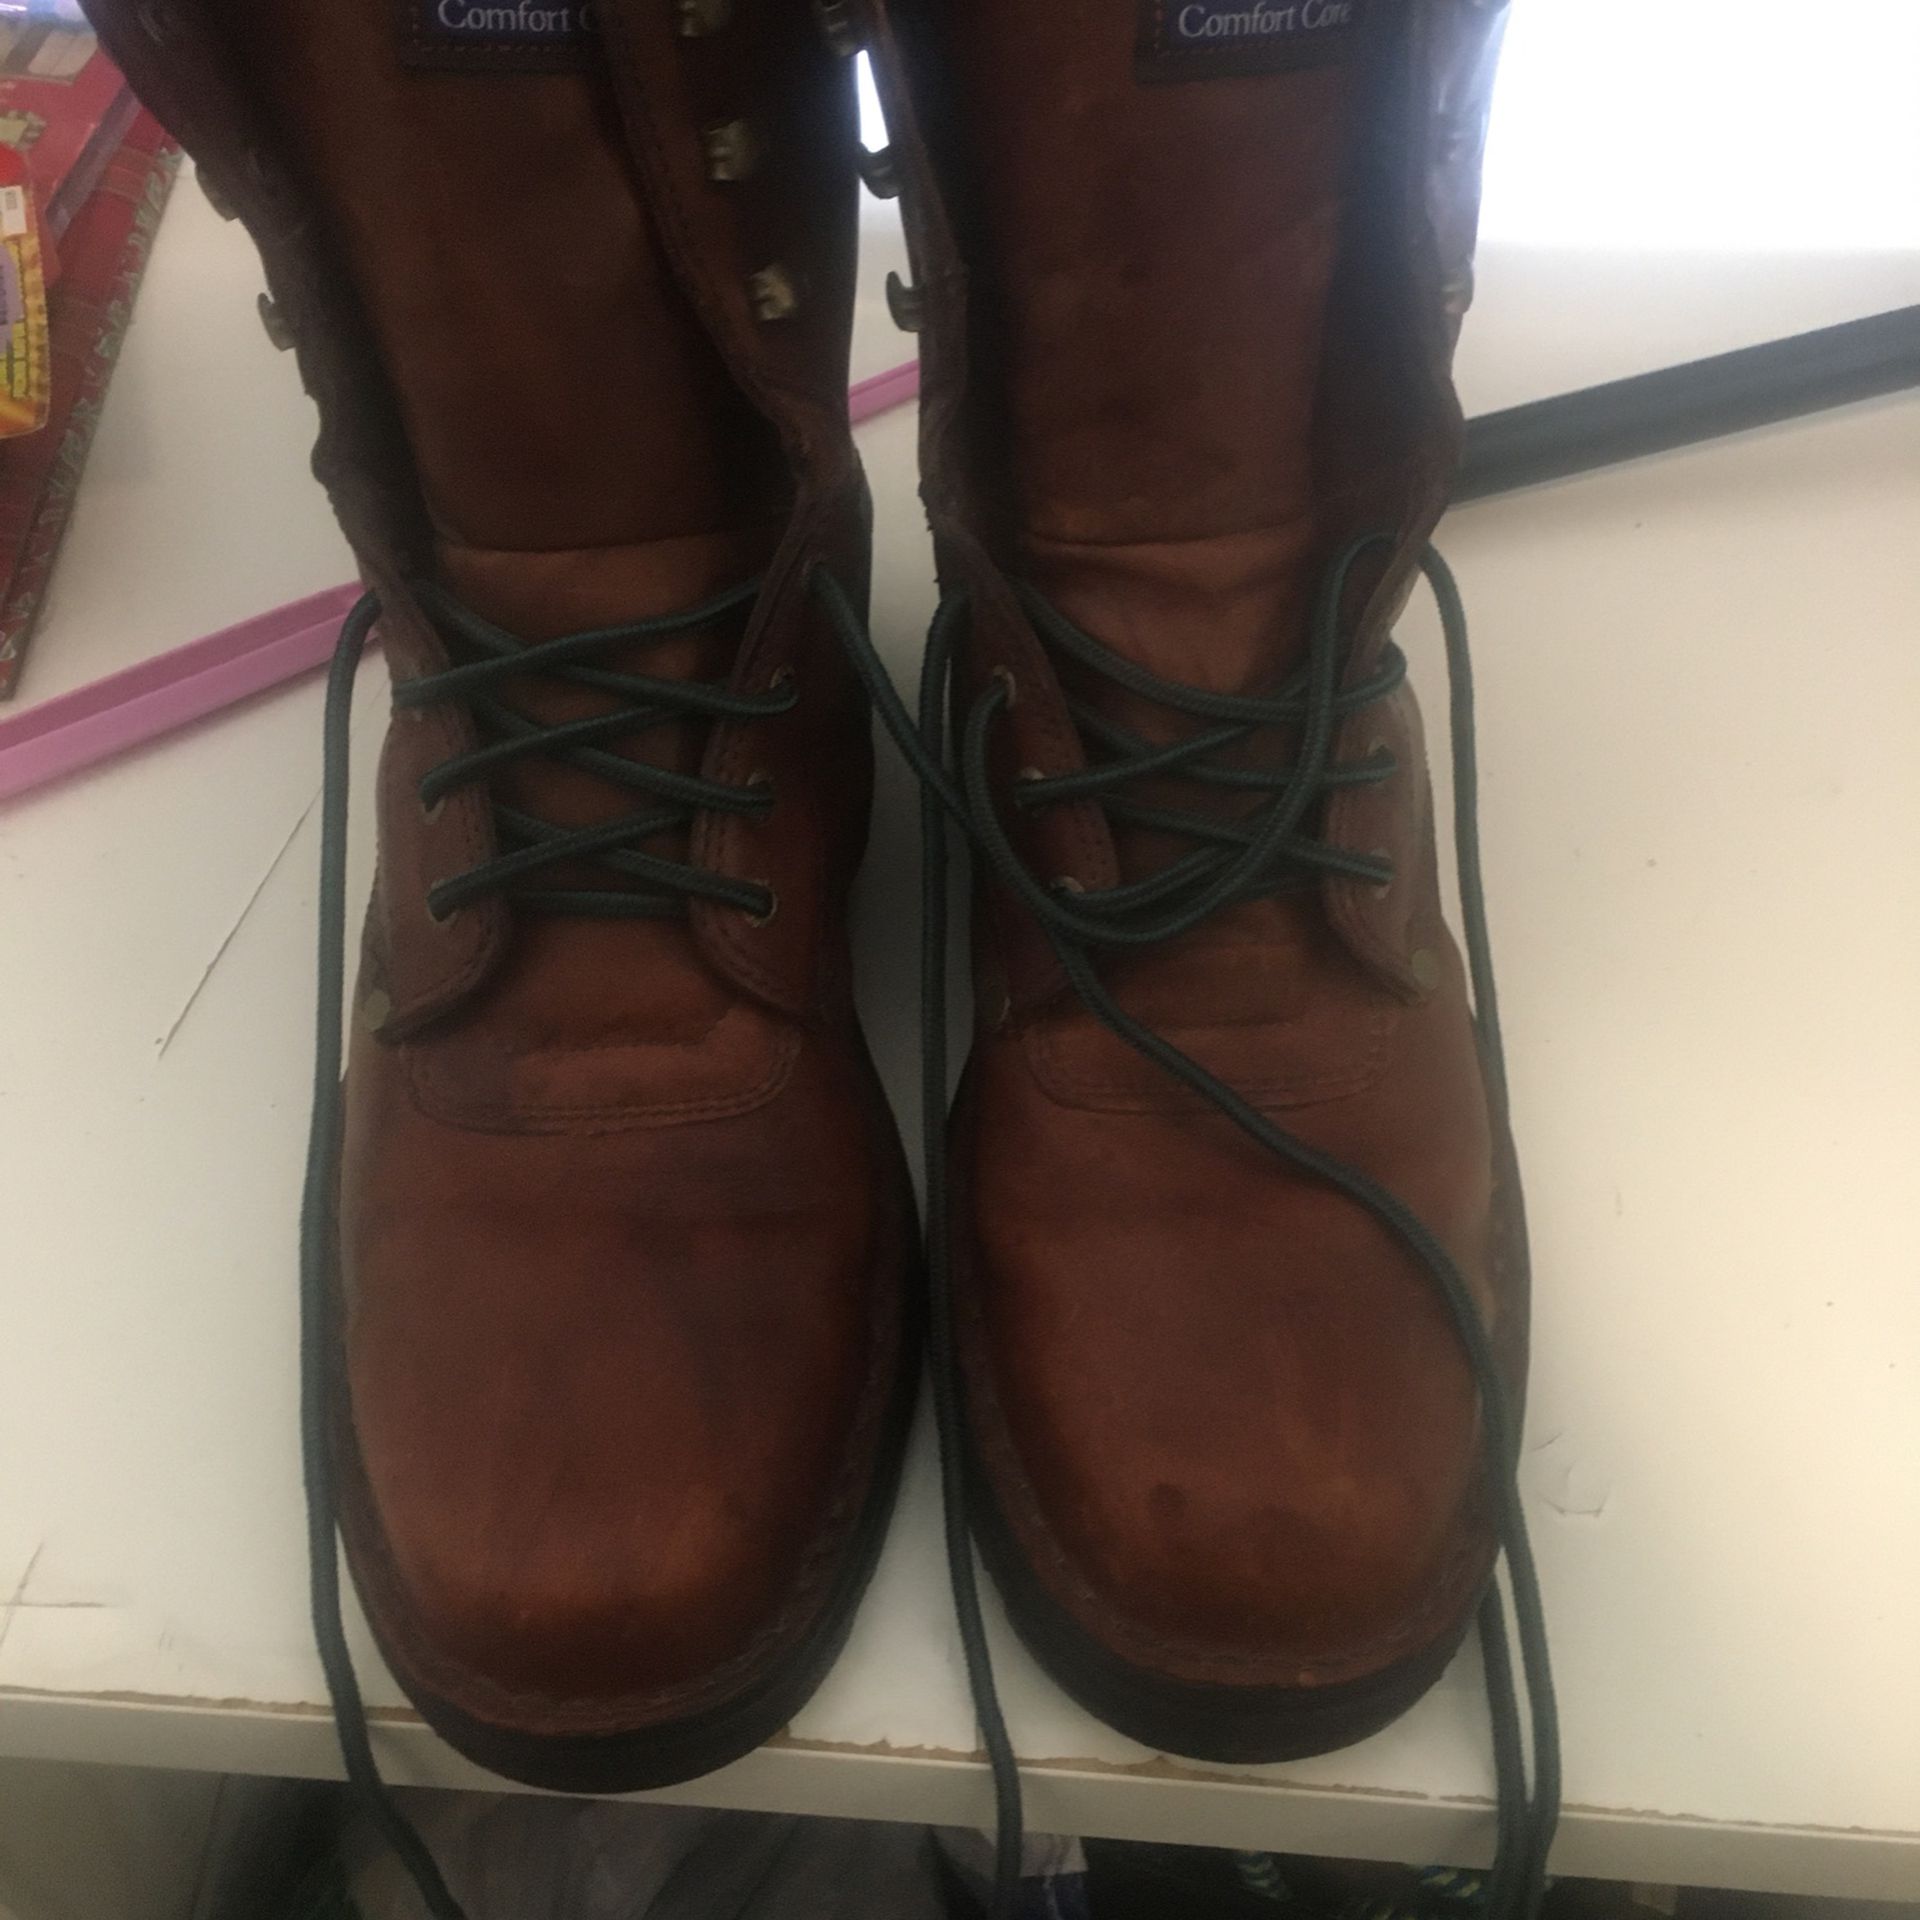 Slightly Used Work Boots 